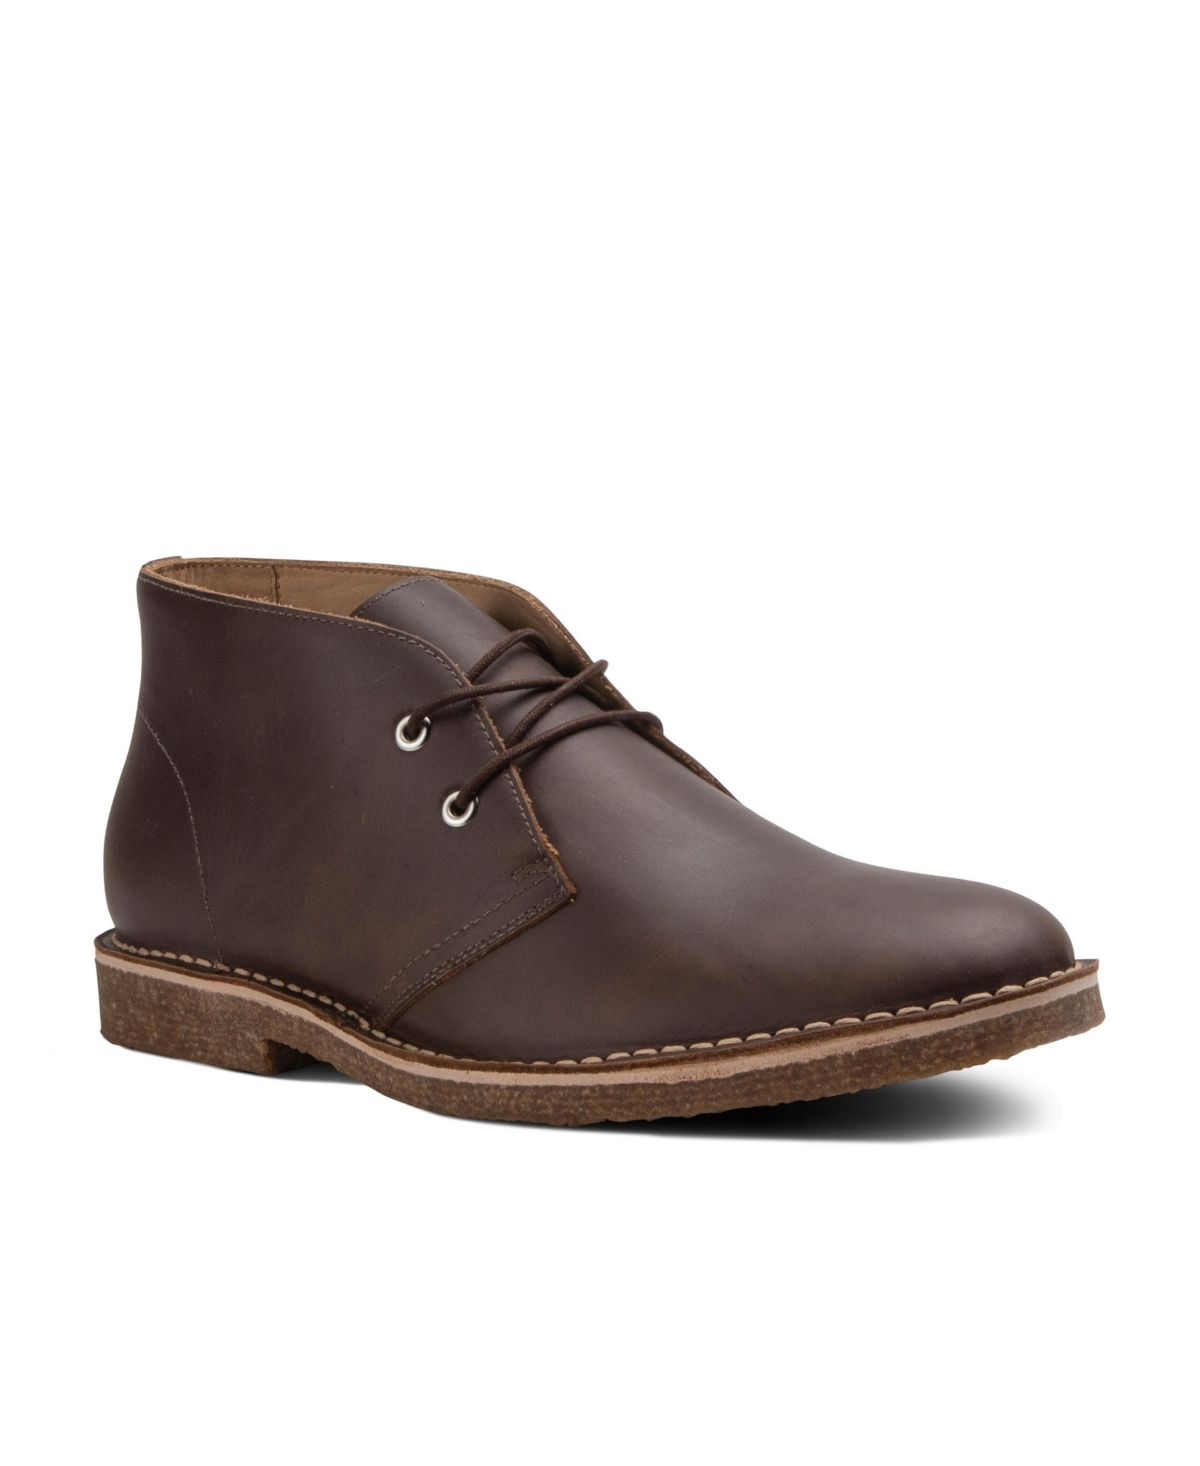 Men's Toby Casual Two-Eye Desert Chukka Boots With Crepe Sole - Brown